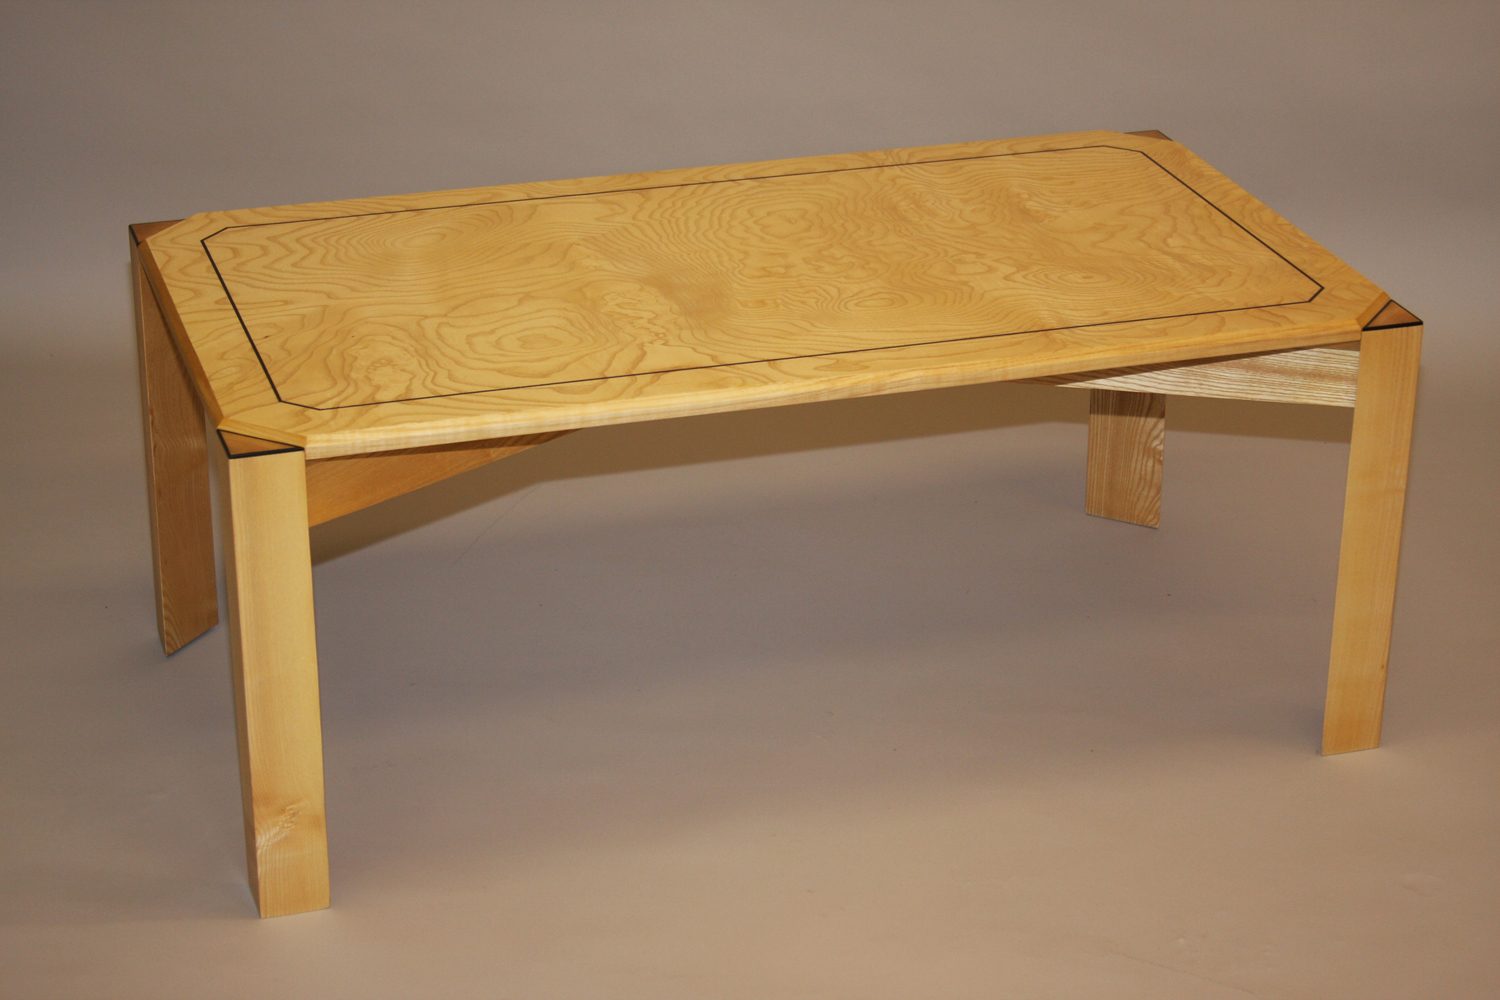 Figured Ash Oblong Coffee Table